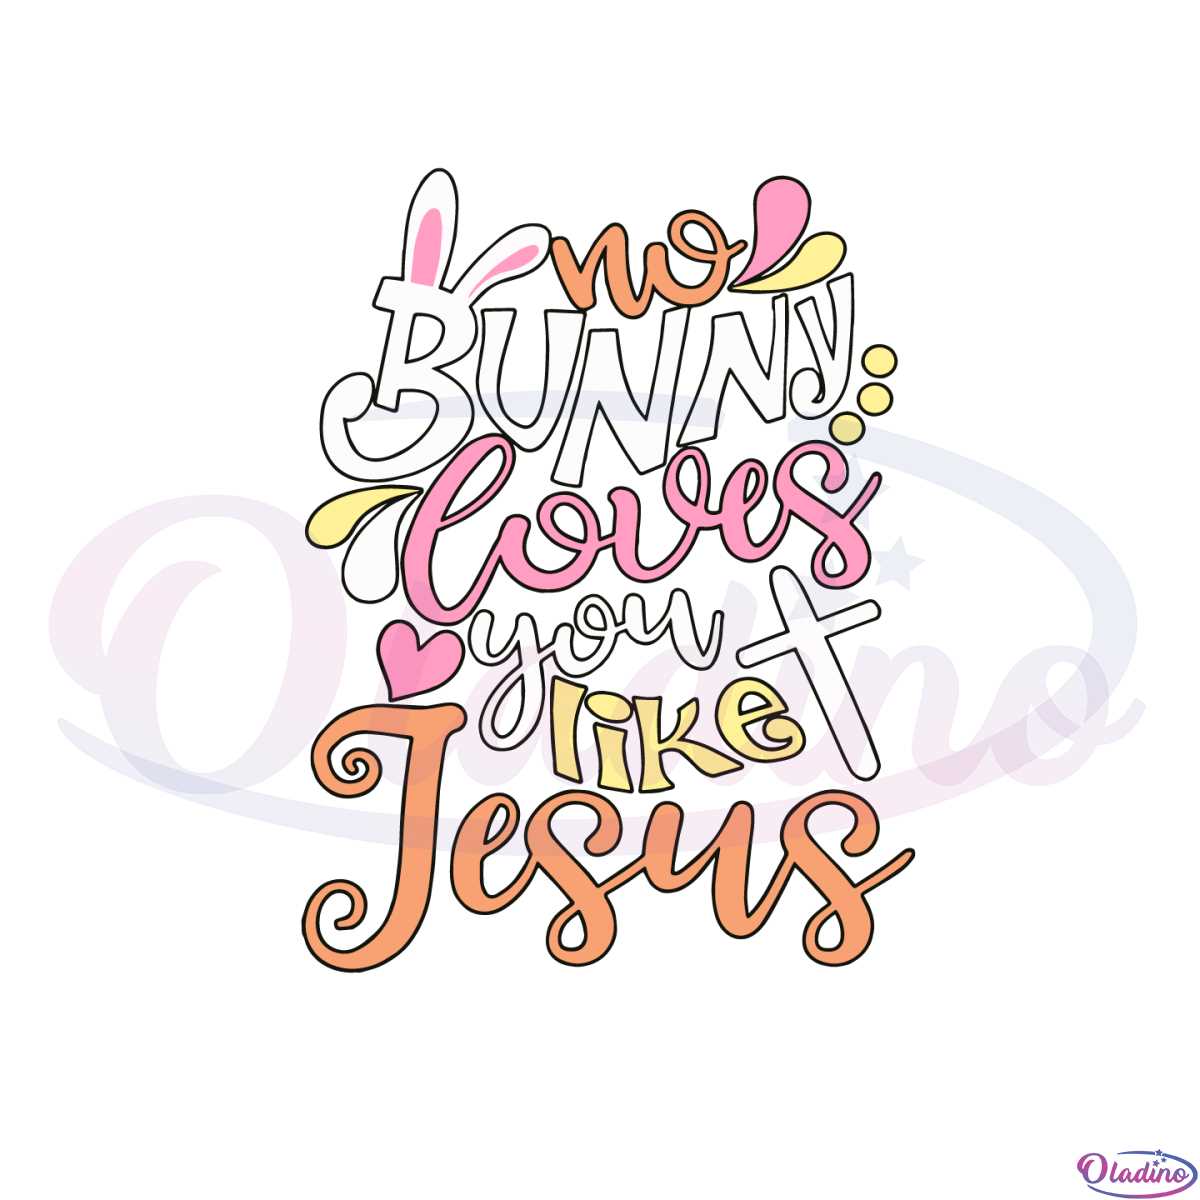 no-bunny-loves-you-like-jesus-funny-easter-day-svg-cutting-files